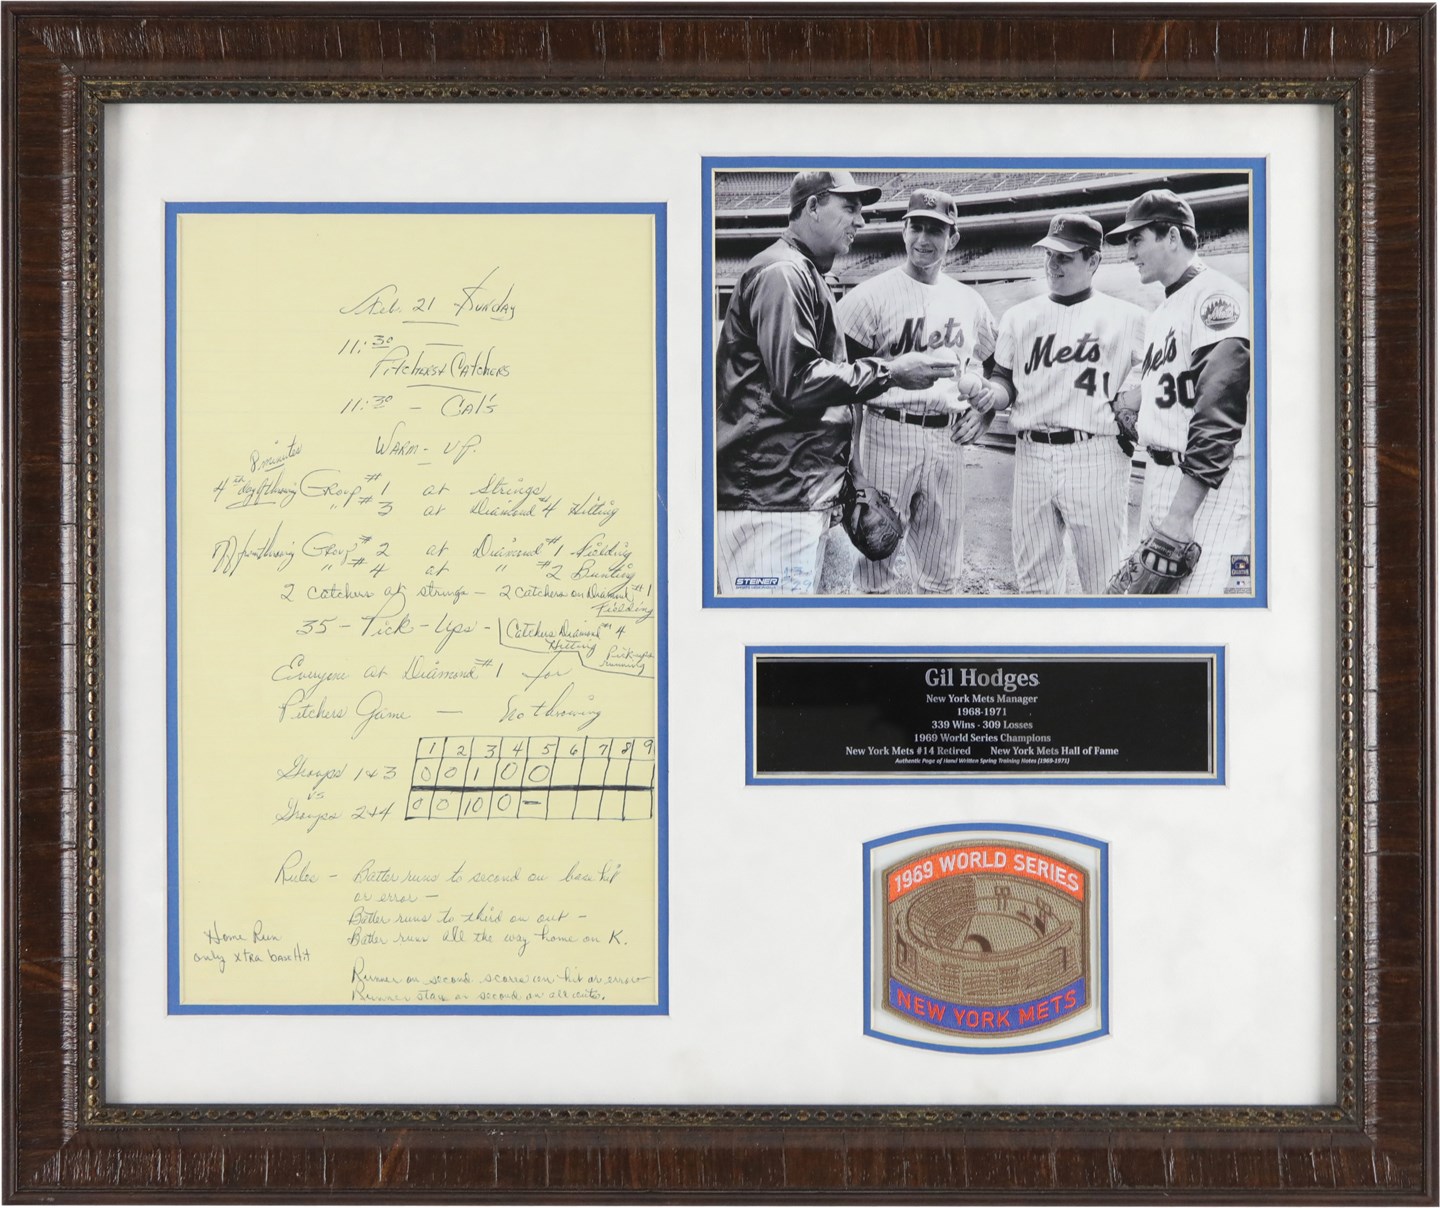 - 1971 Gil Hodges New York Mets Handwritten Spring Training Practice Schedule w/Family Provenance